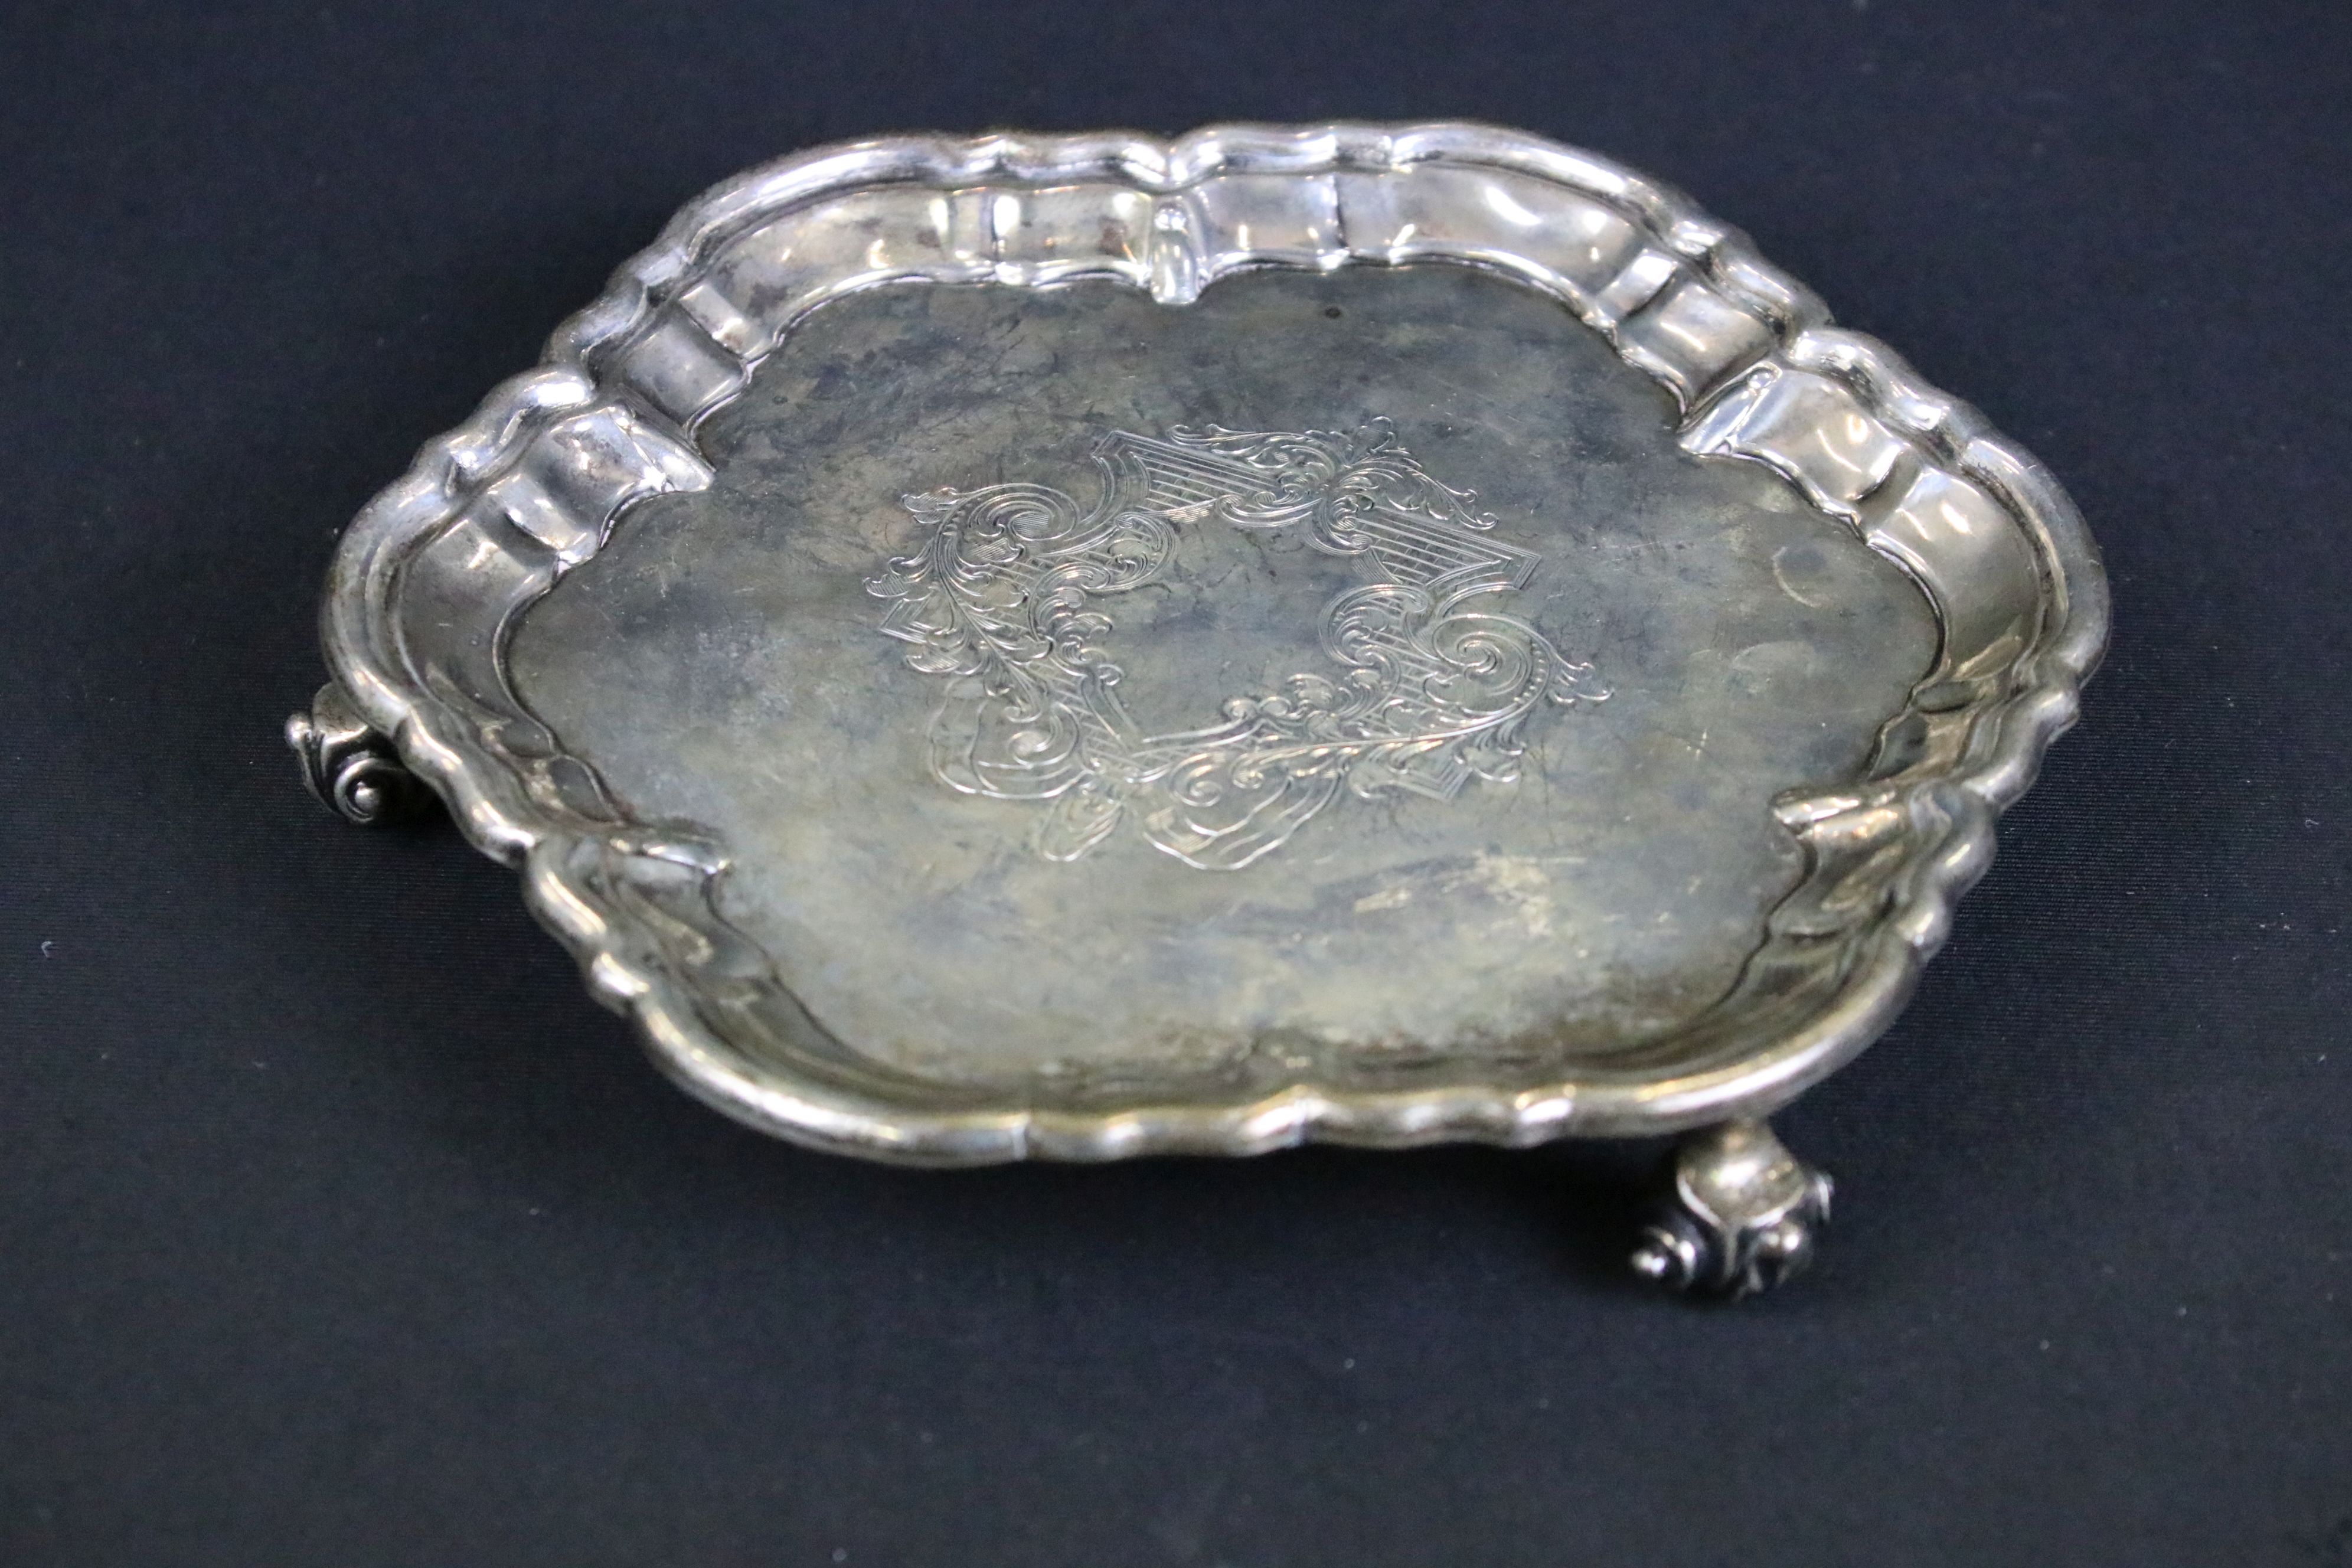 William Hutton & Sons silver salver having a moulded rim with engraved crest raised on scrolled